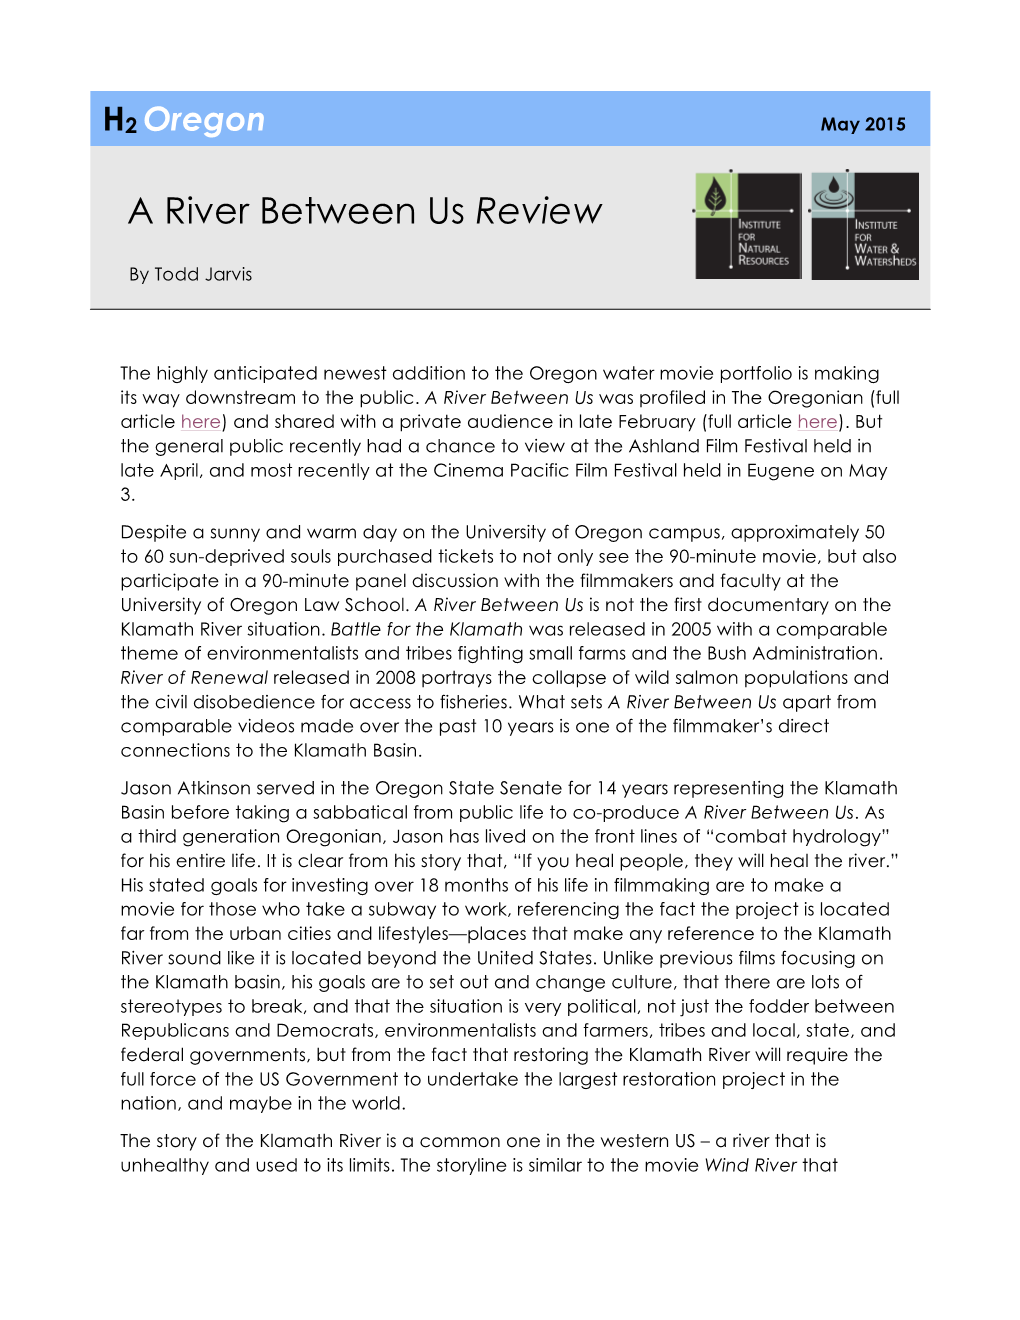 A River Between Us Review